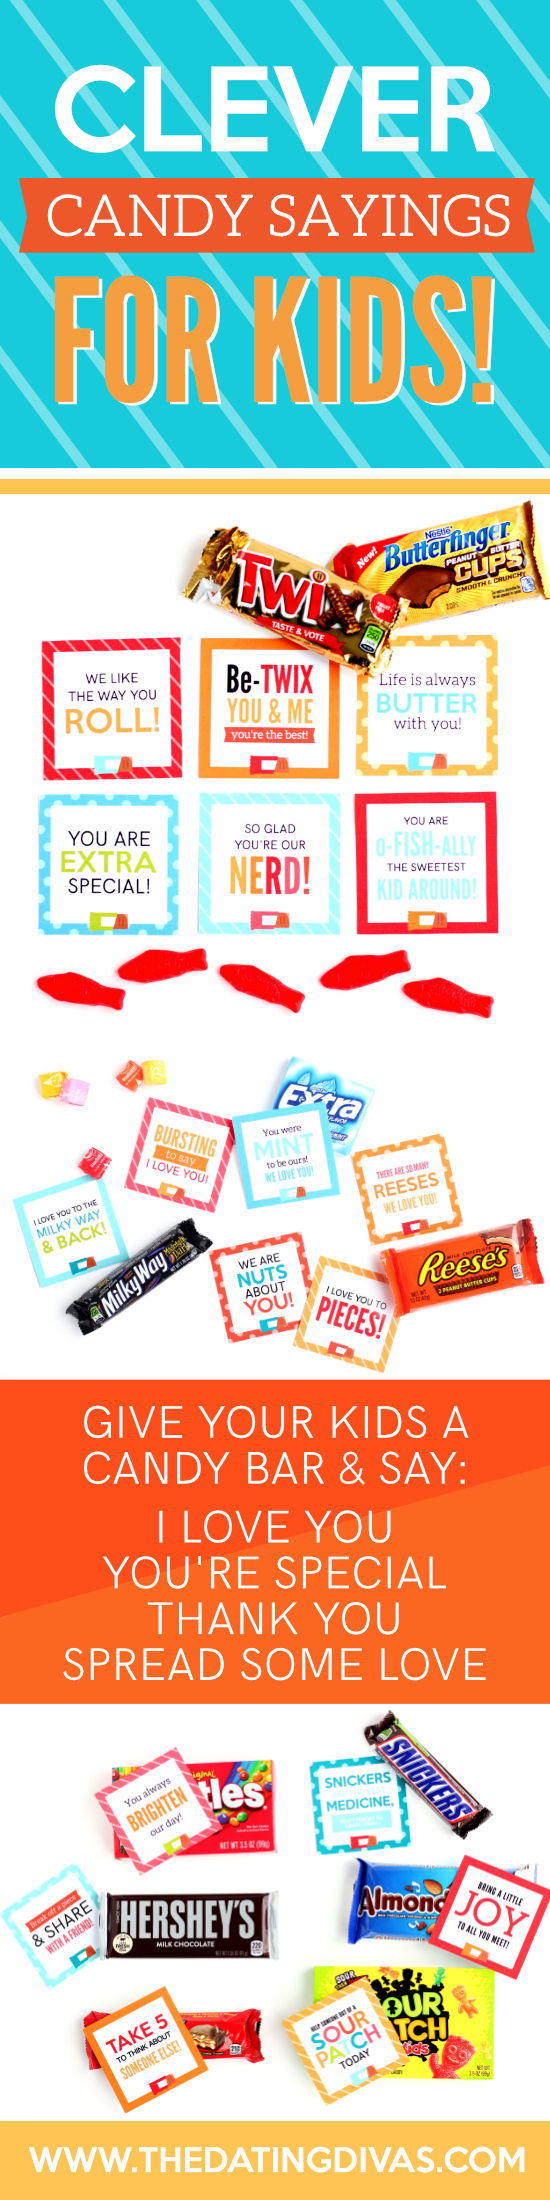 Candy Bar Sayings for Kids From The Dating Divas #CandyBarSayings #LoveNotesforKids